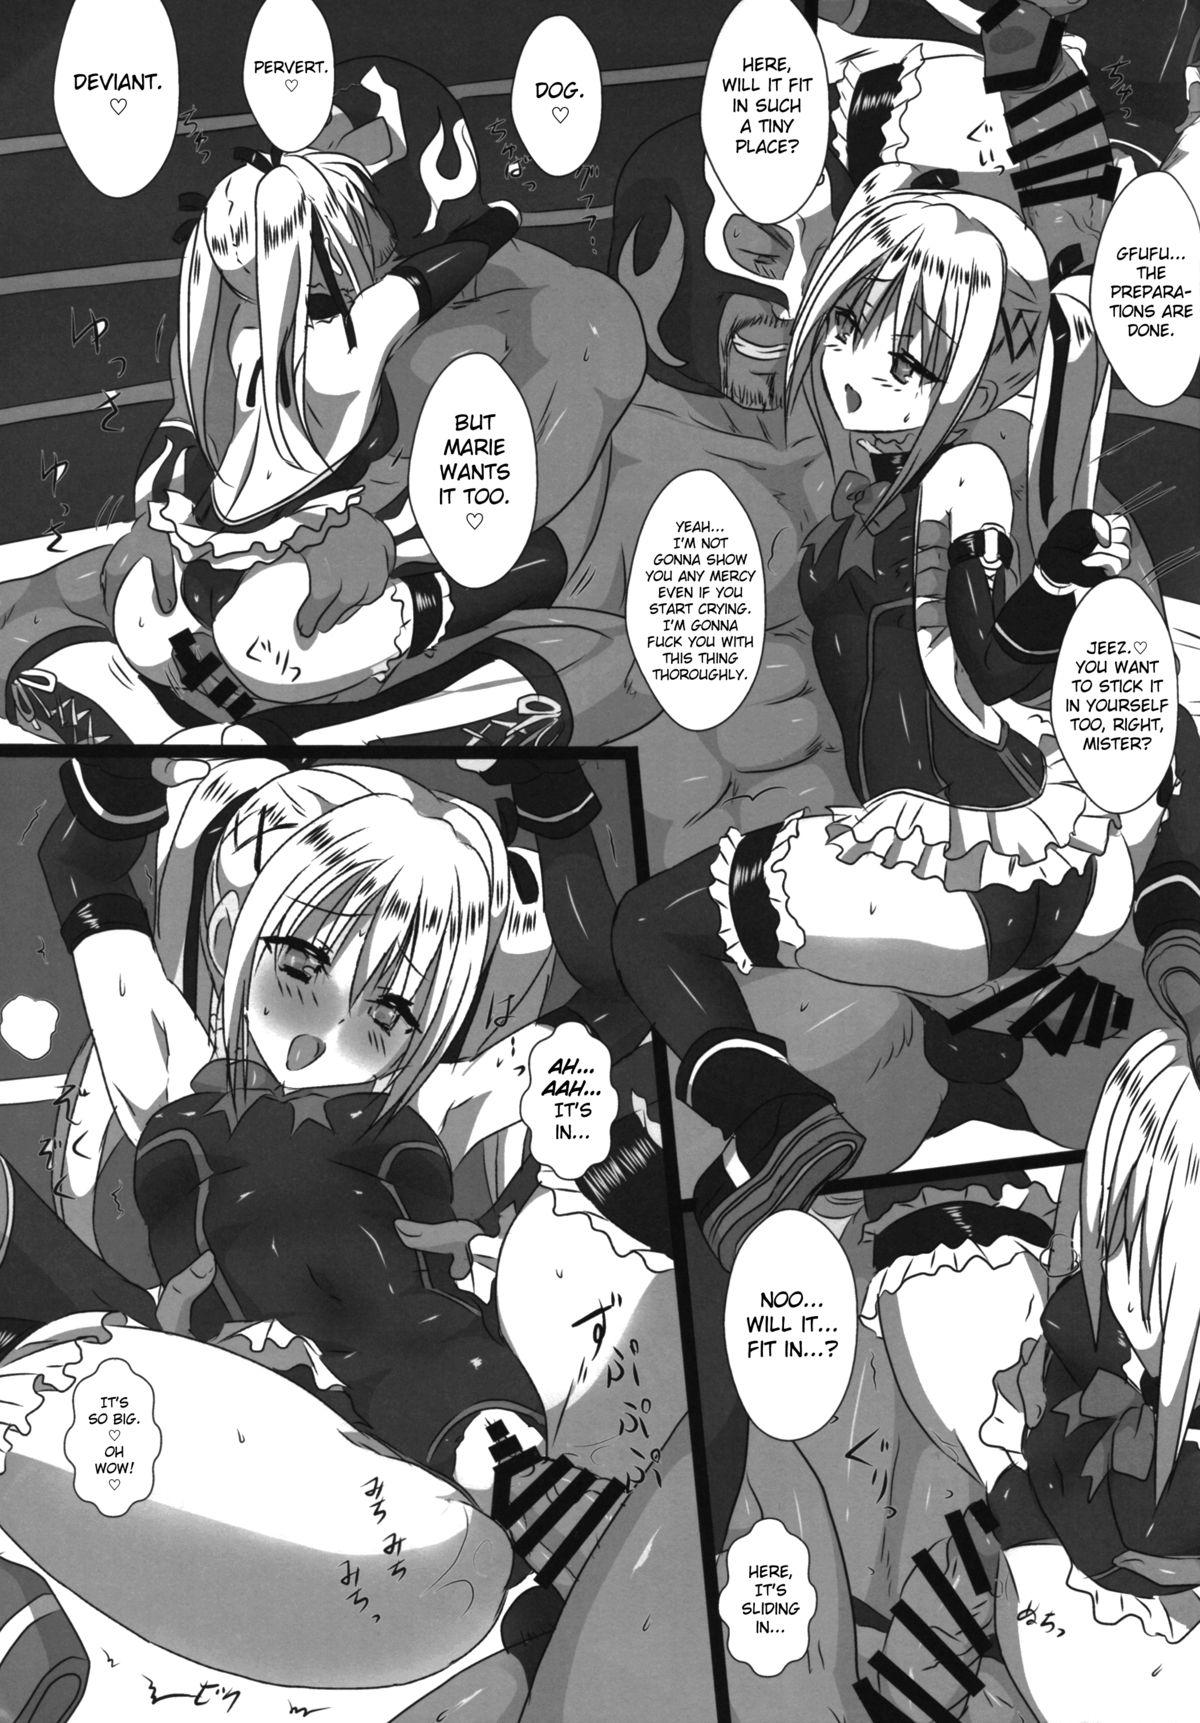 Free Fuck Koko de Shitai no ne...? | This is where you want to do it, right...? - Dead or alive Riding - Page 10